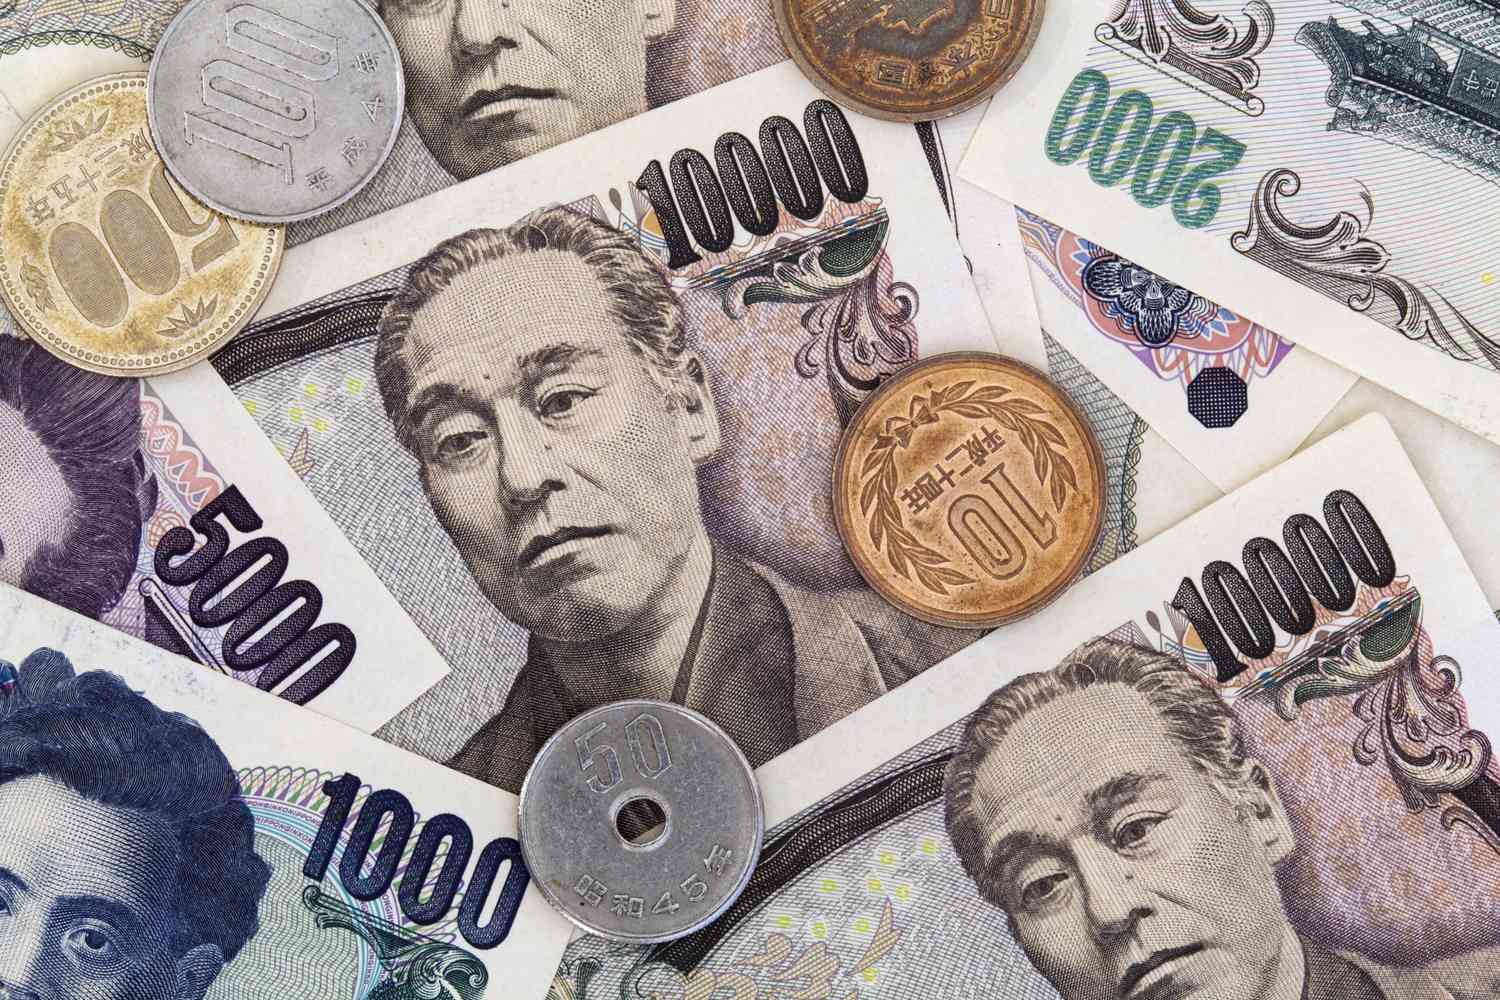 Japan’s Interest in Structural Changes Is Rekindled as a Result of the Consistently Falling Yen